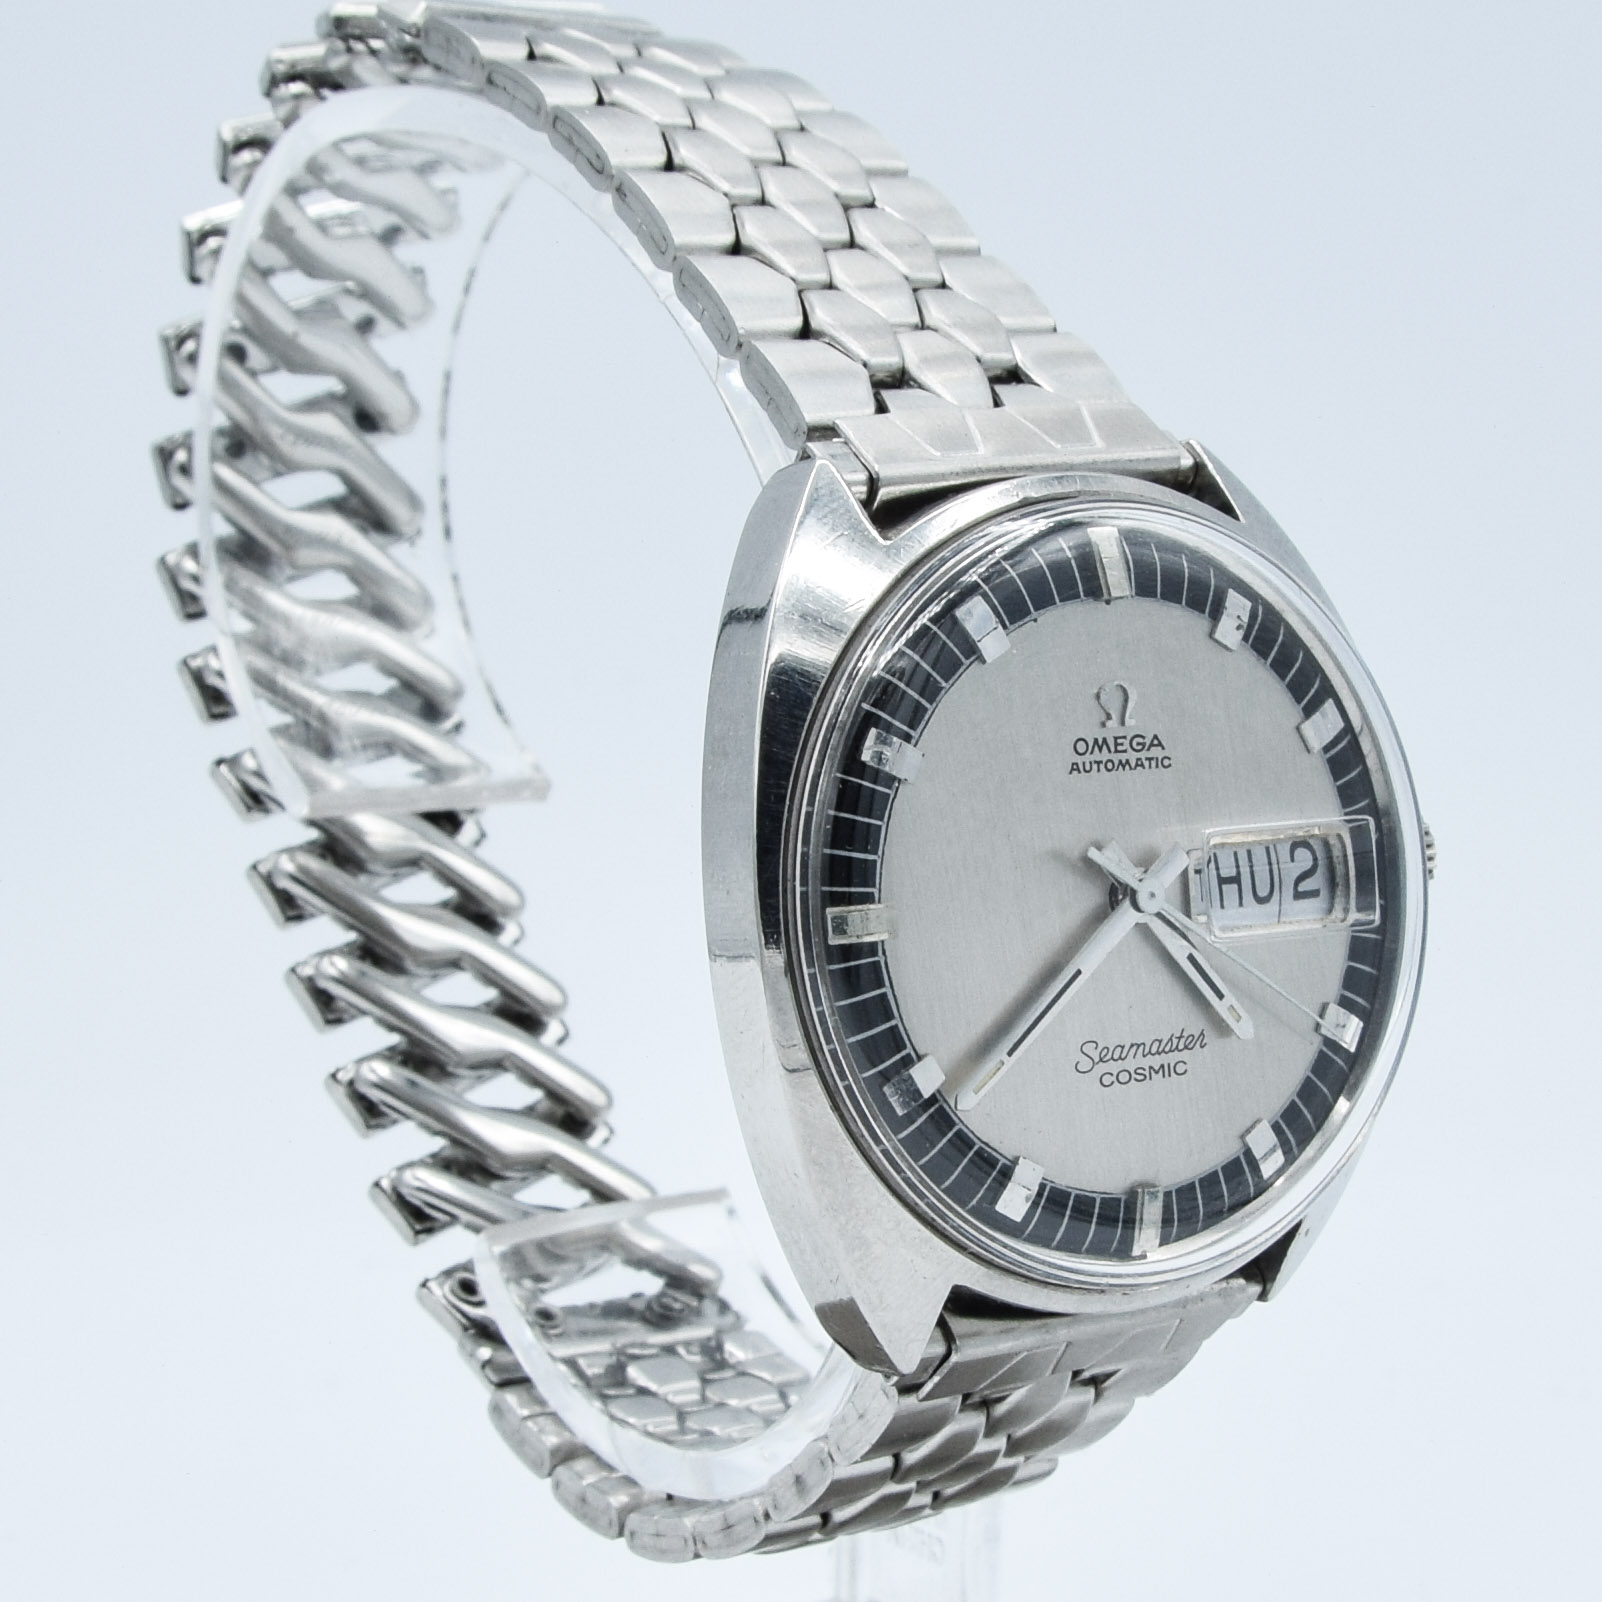 OMEGA SEAMASTER COSMIC DAY DATE AUTOMATIC IN STAINLESS STEEL CASE ON UNUSUAL BRACELET DATED 1969. - Image 2 of 9